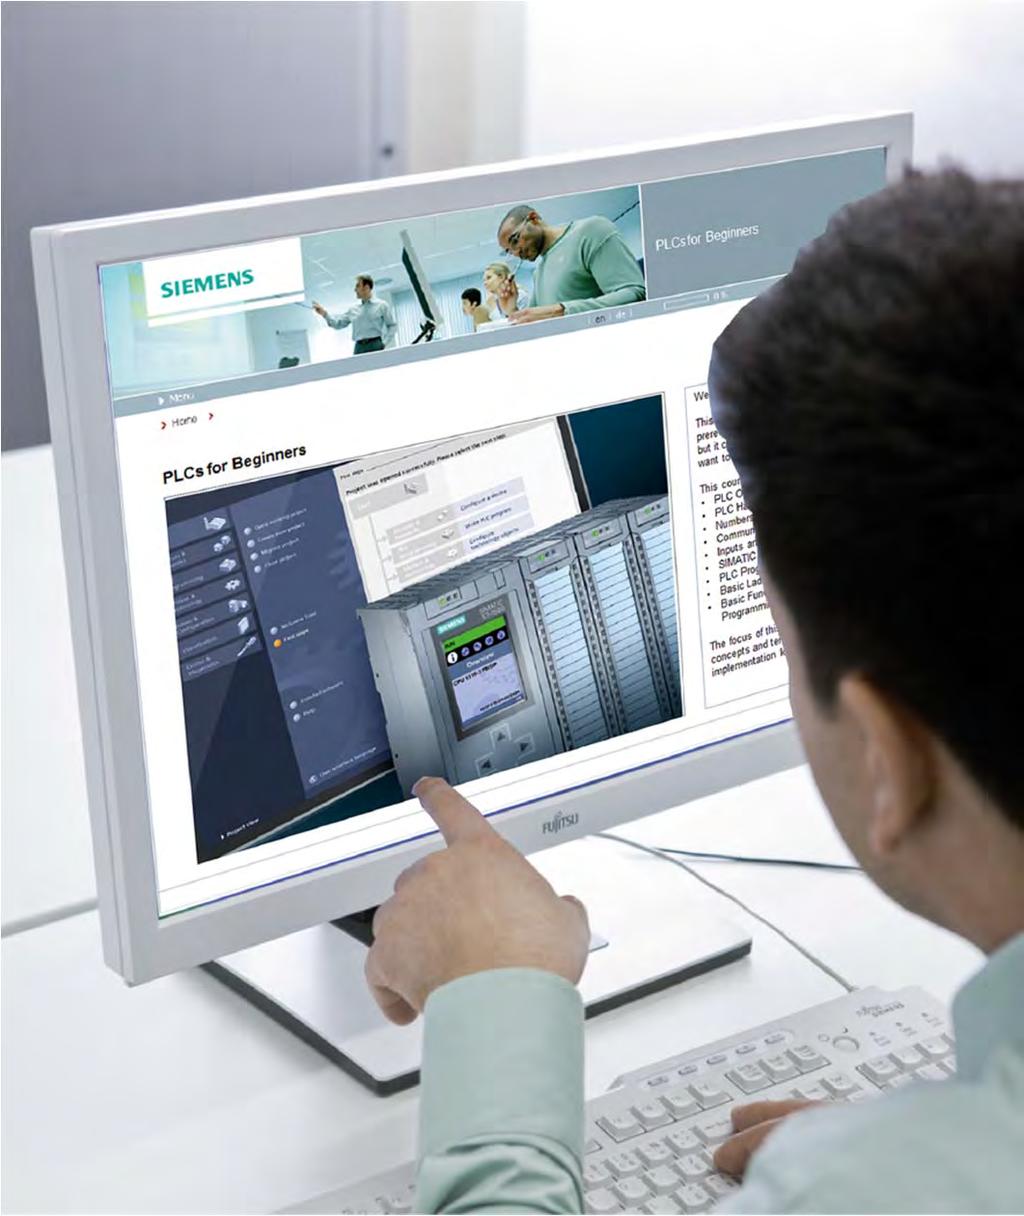 Online Self-paced Learning With Siemens online self-paced learning, you select the topics and set your own pace for completing chosen courses. All course material can be accessed online.